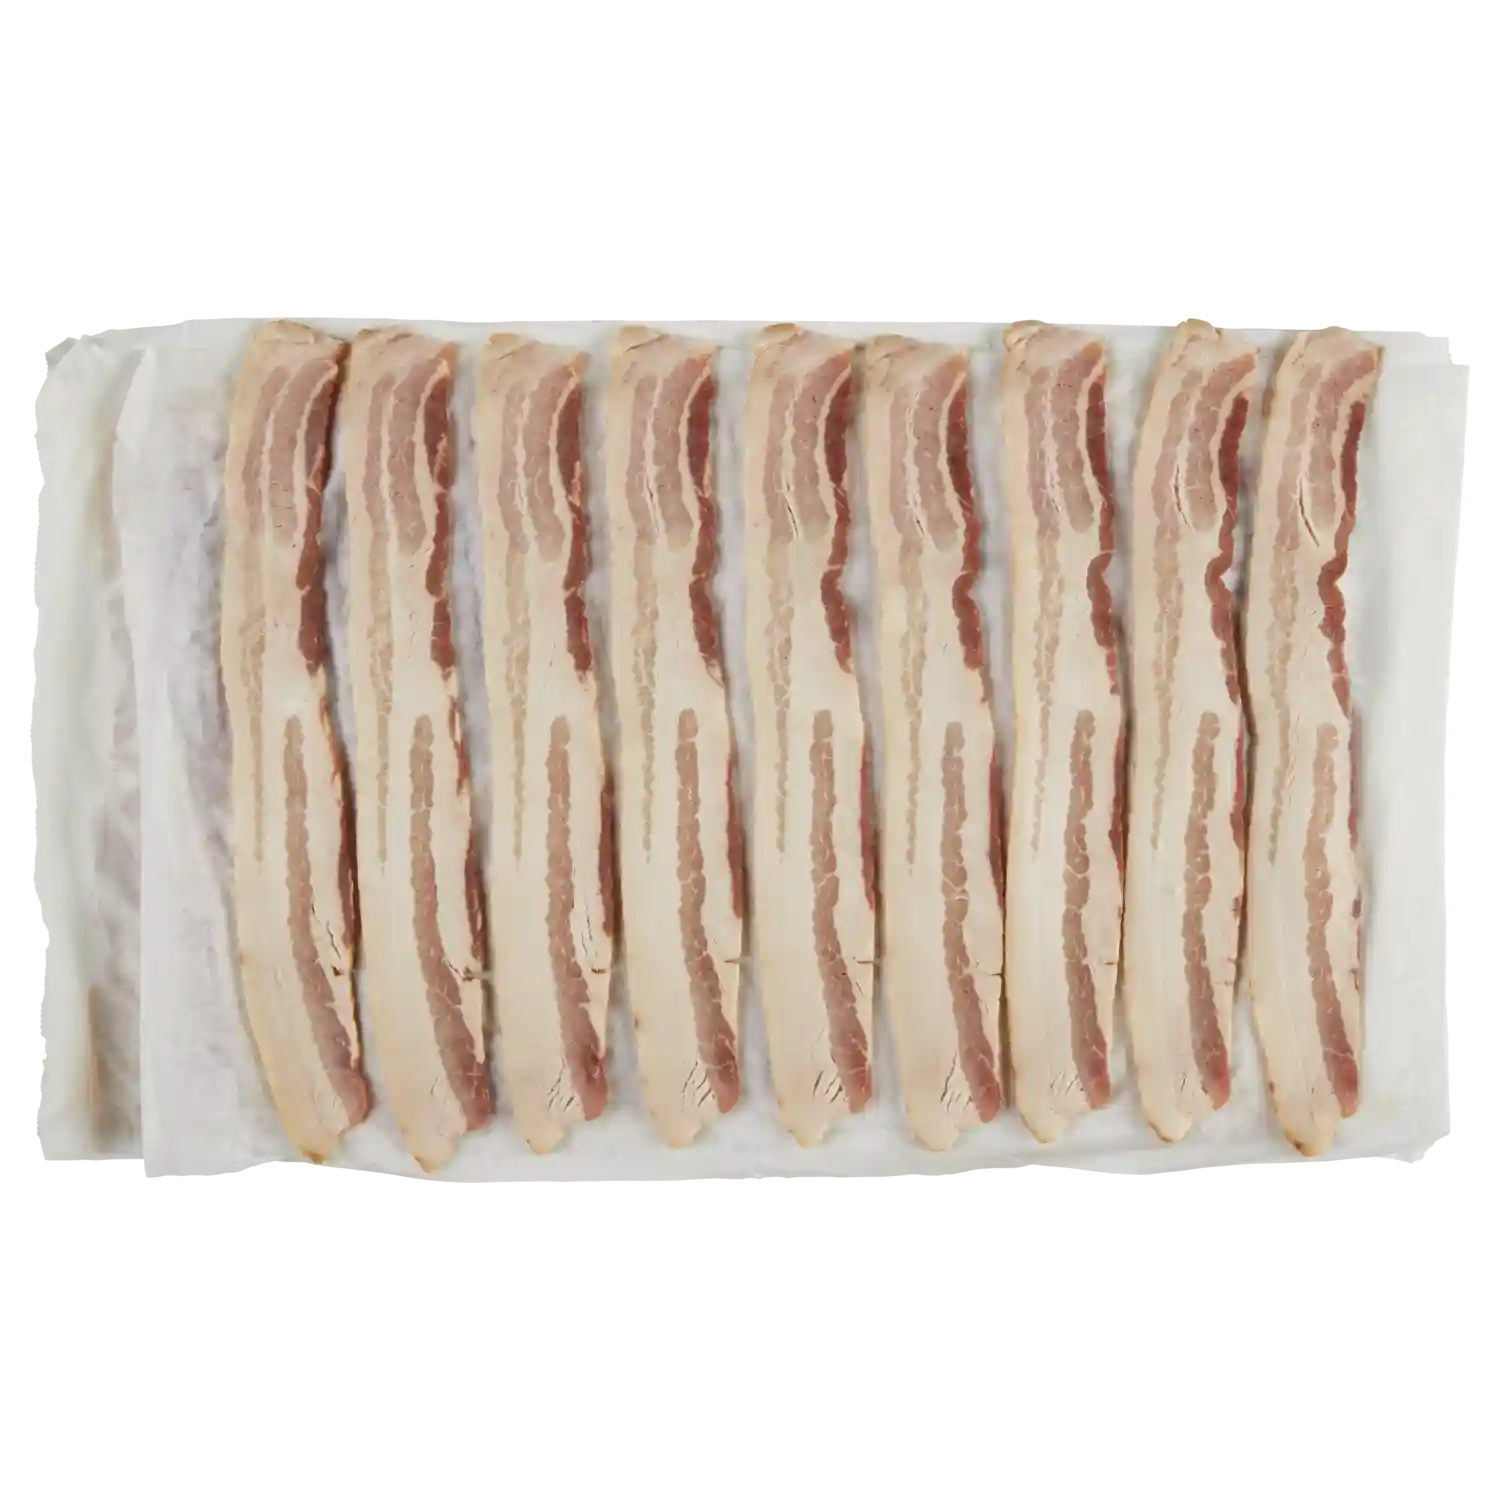 Wright® Brand Naturally Hickory Smoked Extra Thick Sliced Bacon, Flat-Pack®, 15 Lbs, 8-10 Slices per Pound, Frozen_image_31